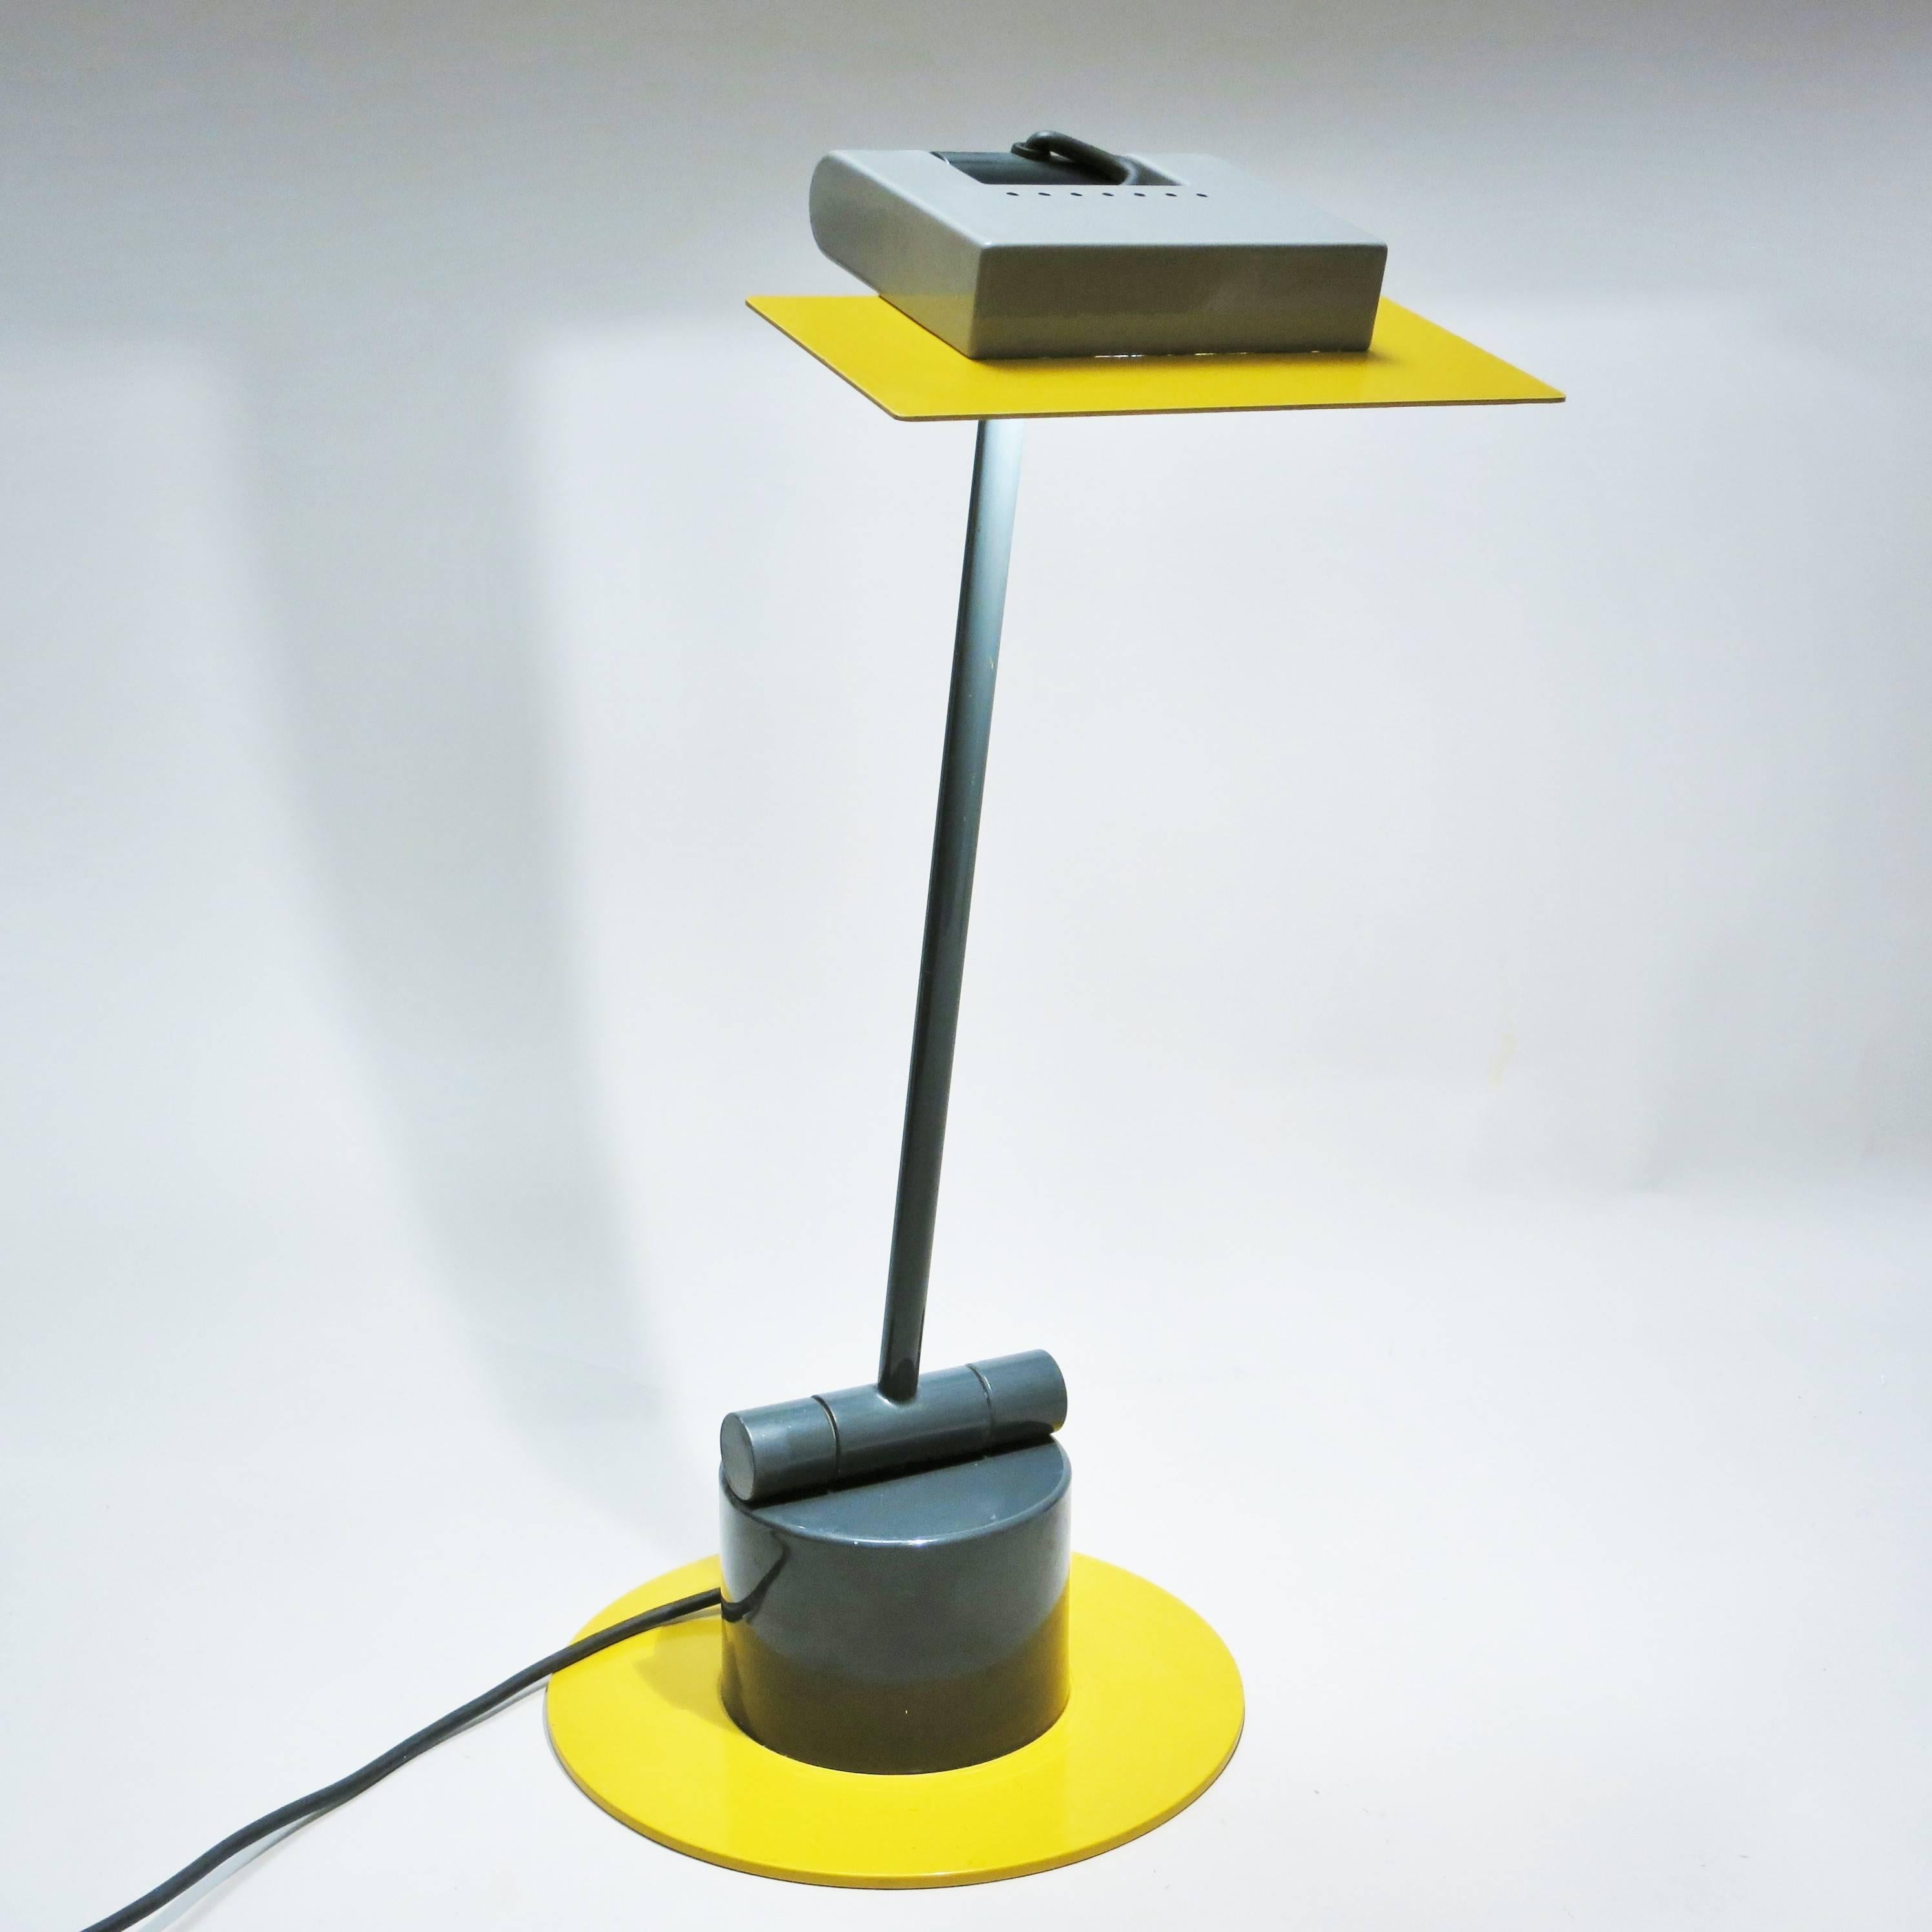 Post-modern desk lamp Aero designed by Ettore Sottsass for Bieffeplast in 1983, in dark grey, light grey and yellow lacquered metal. Orientable.